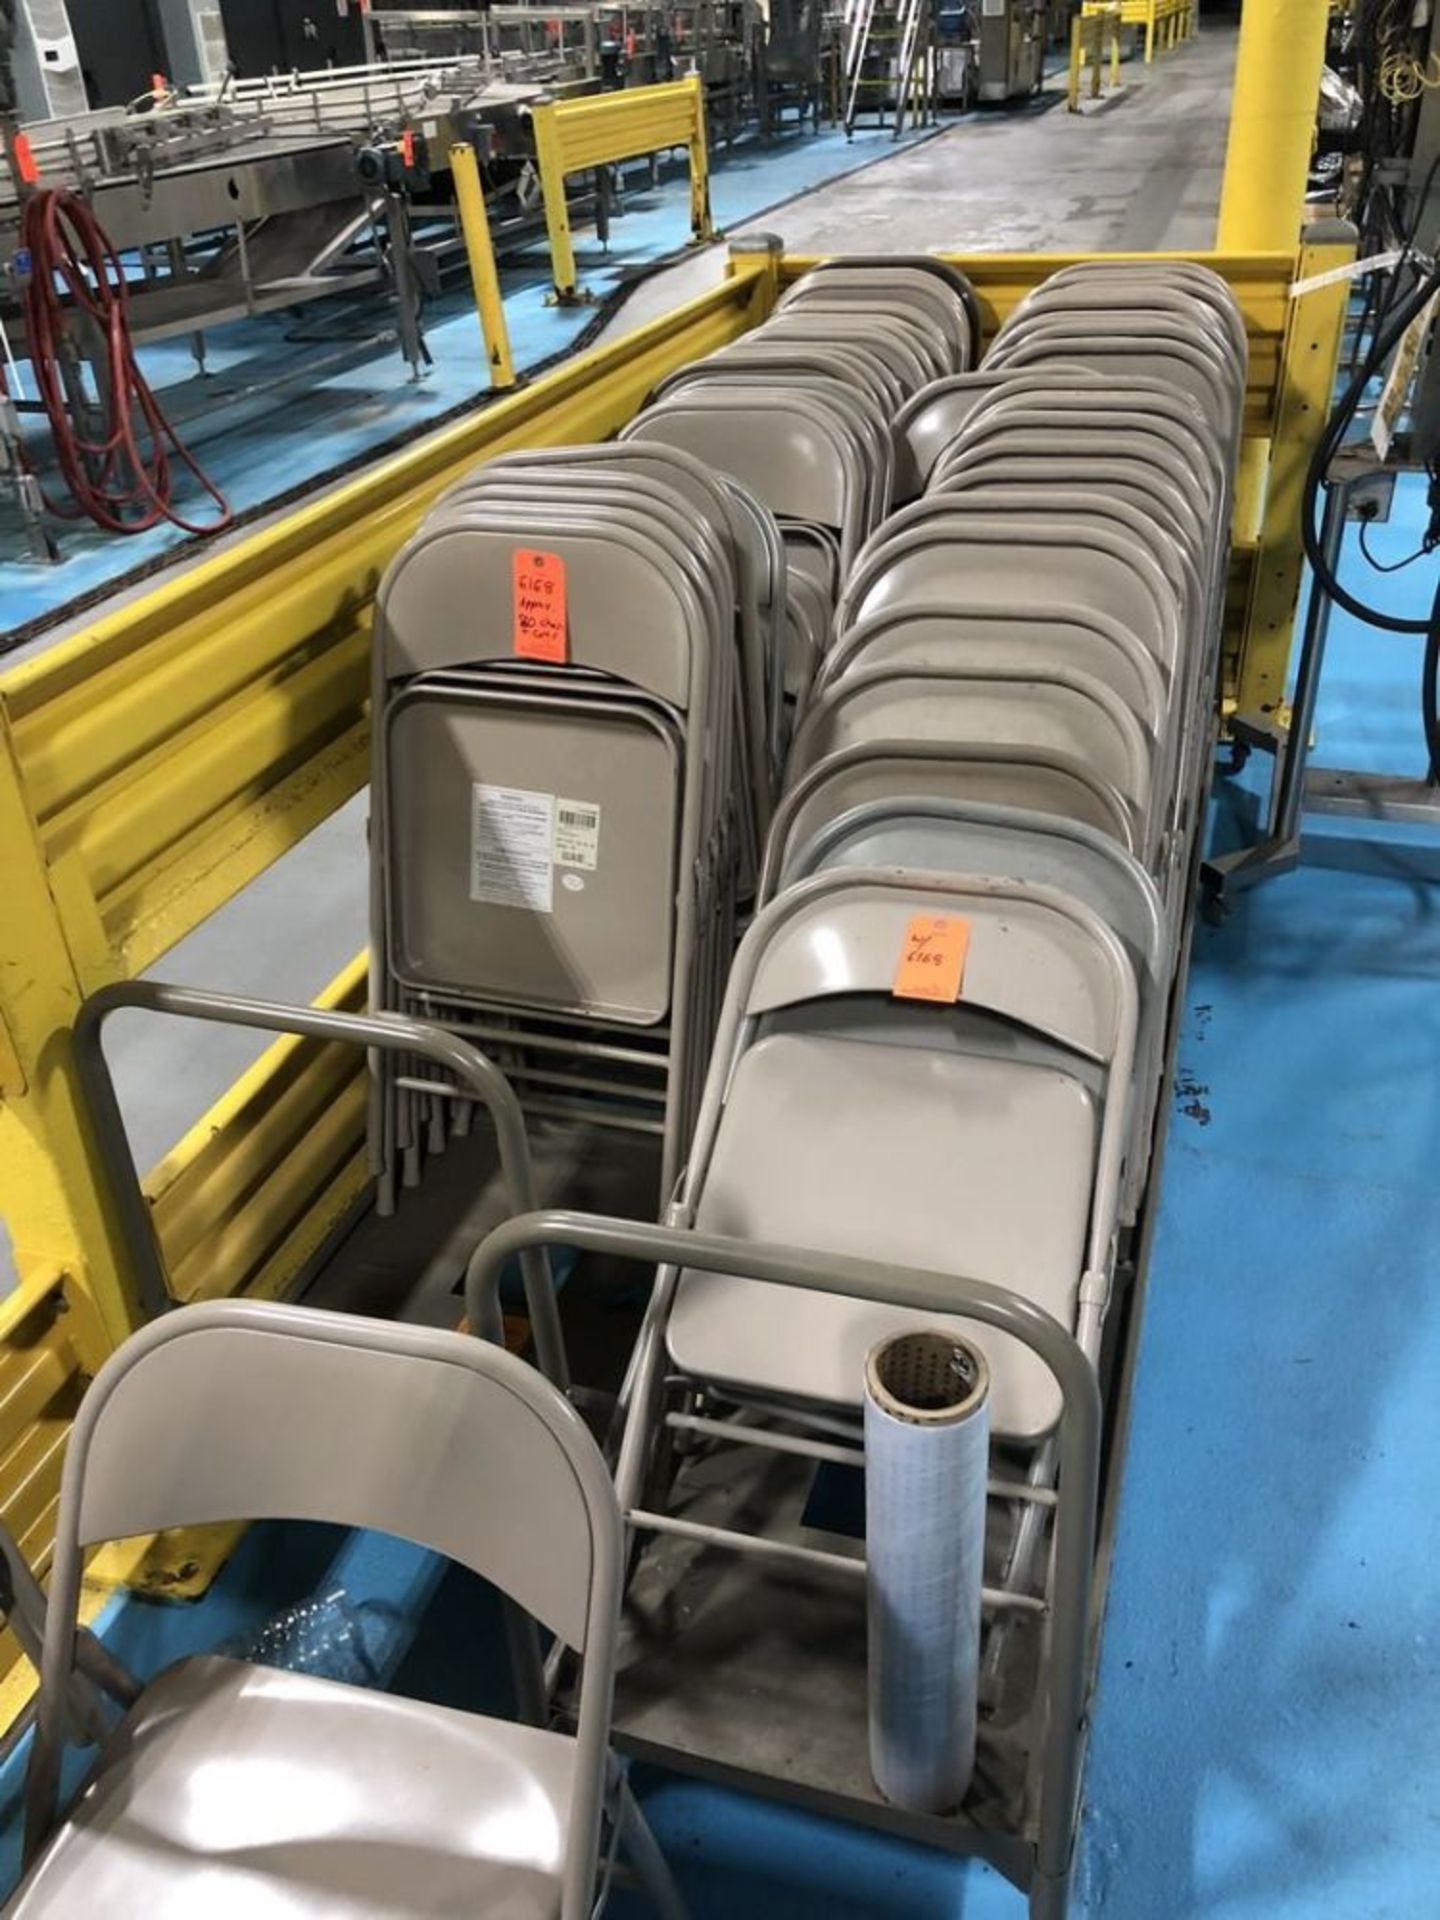 Approx. (90) Folding Metal Chairs with (2) Storage Carts. Location in Plant: Main Building